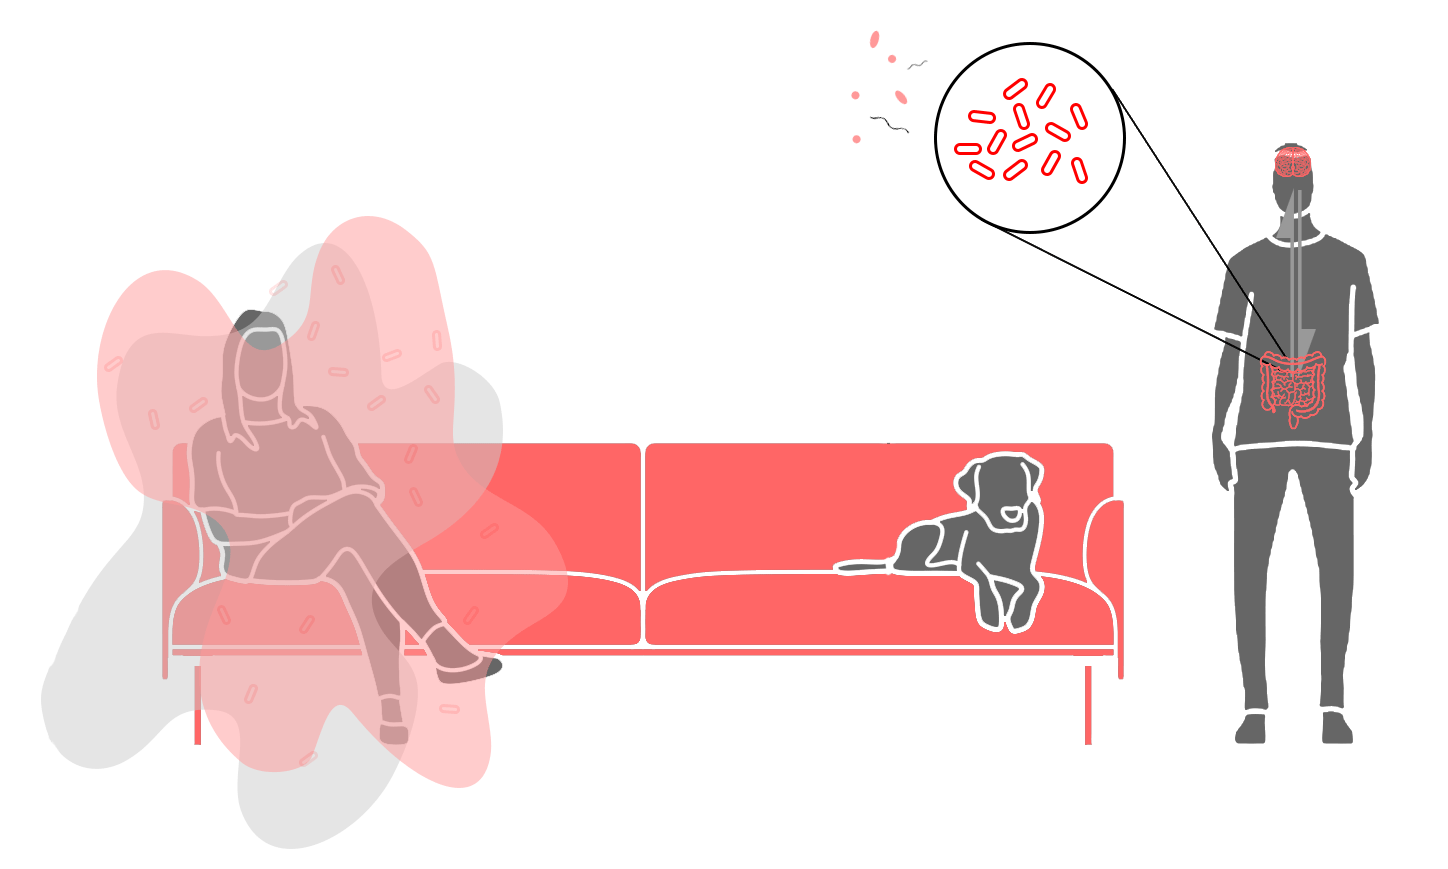 A couch with a woman and a dog sitting on it and a man standing next to it. the man and woman have a microbial cloud visualised around them